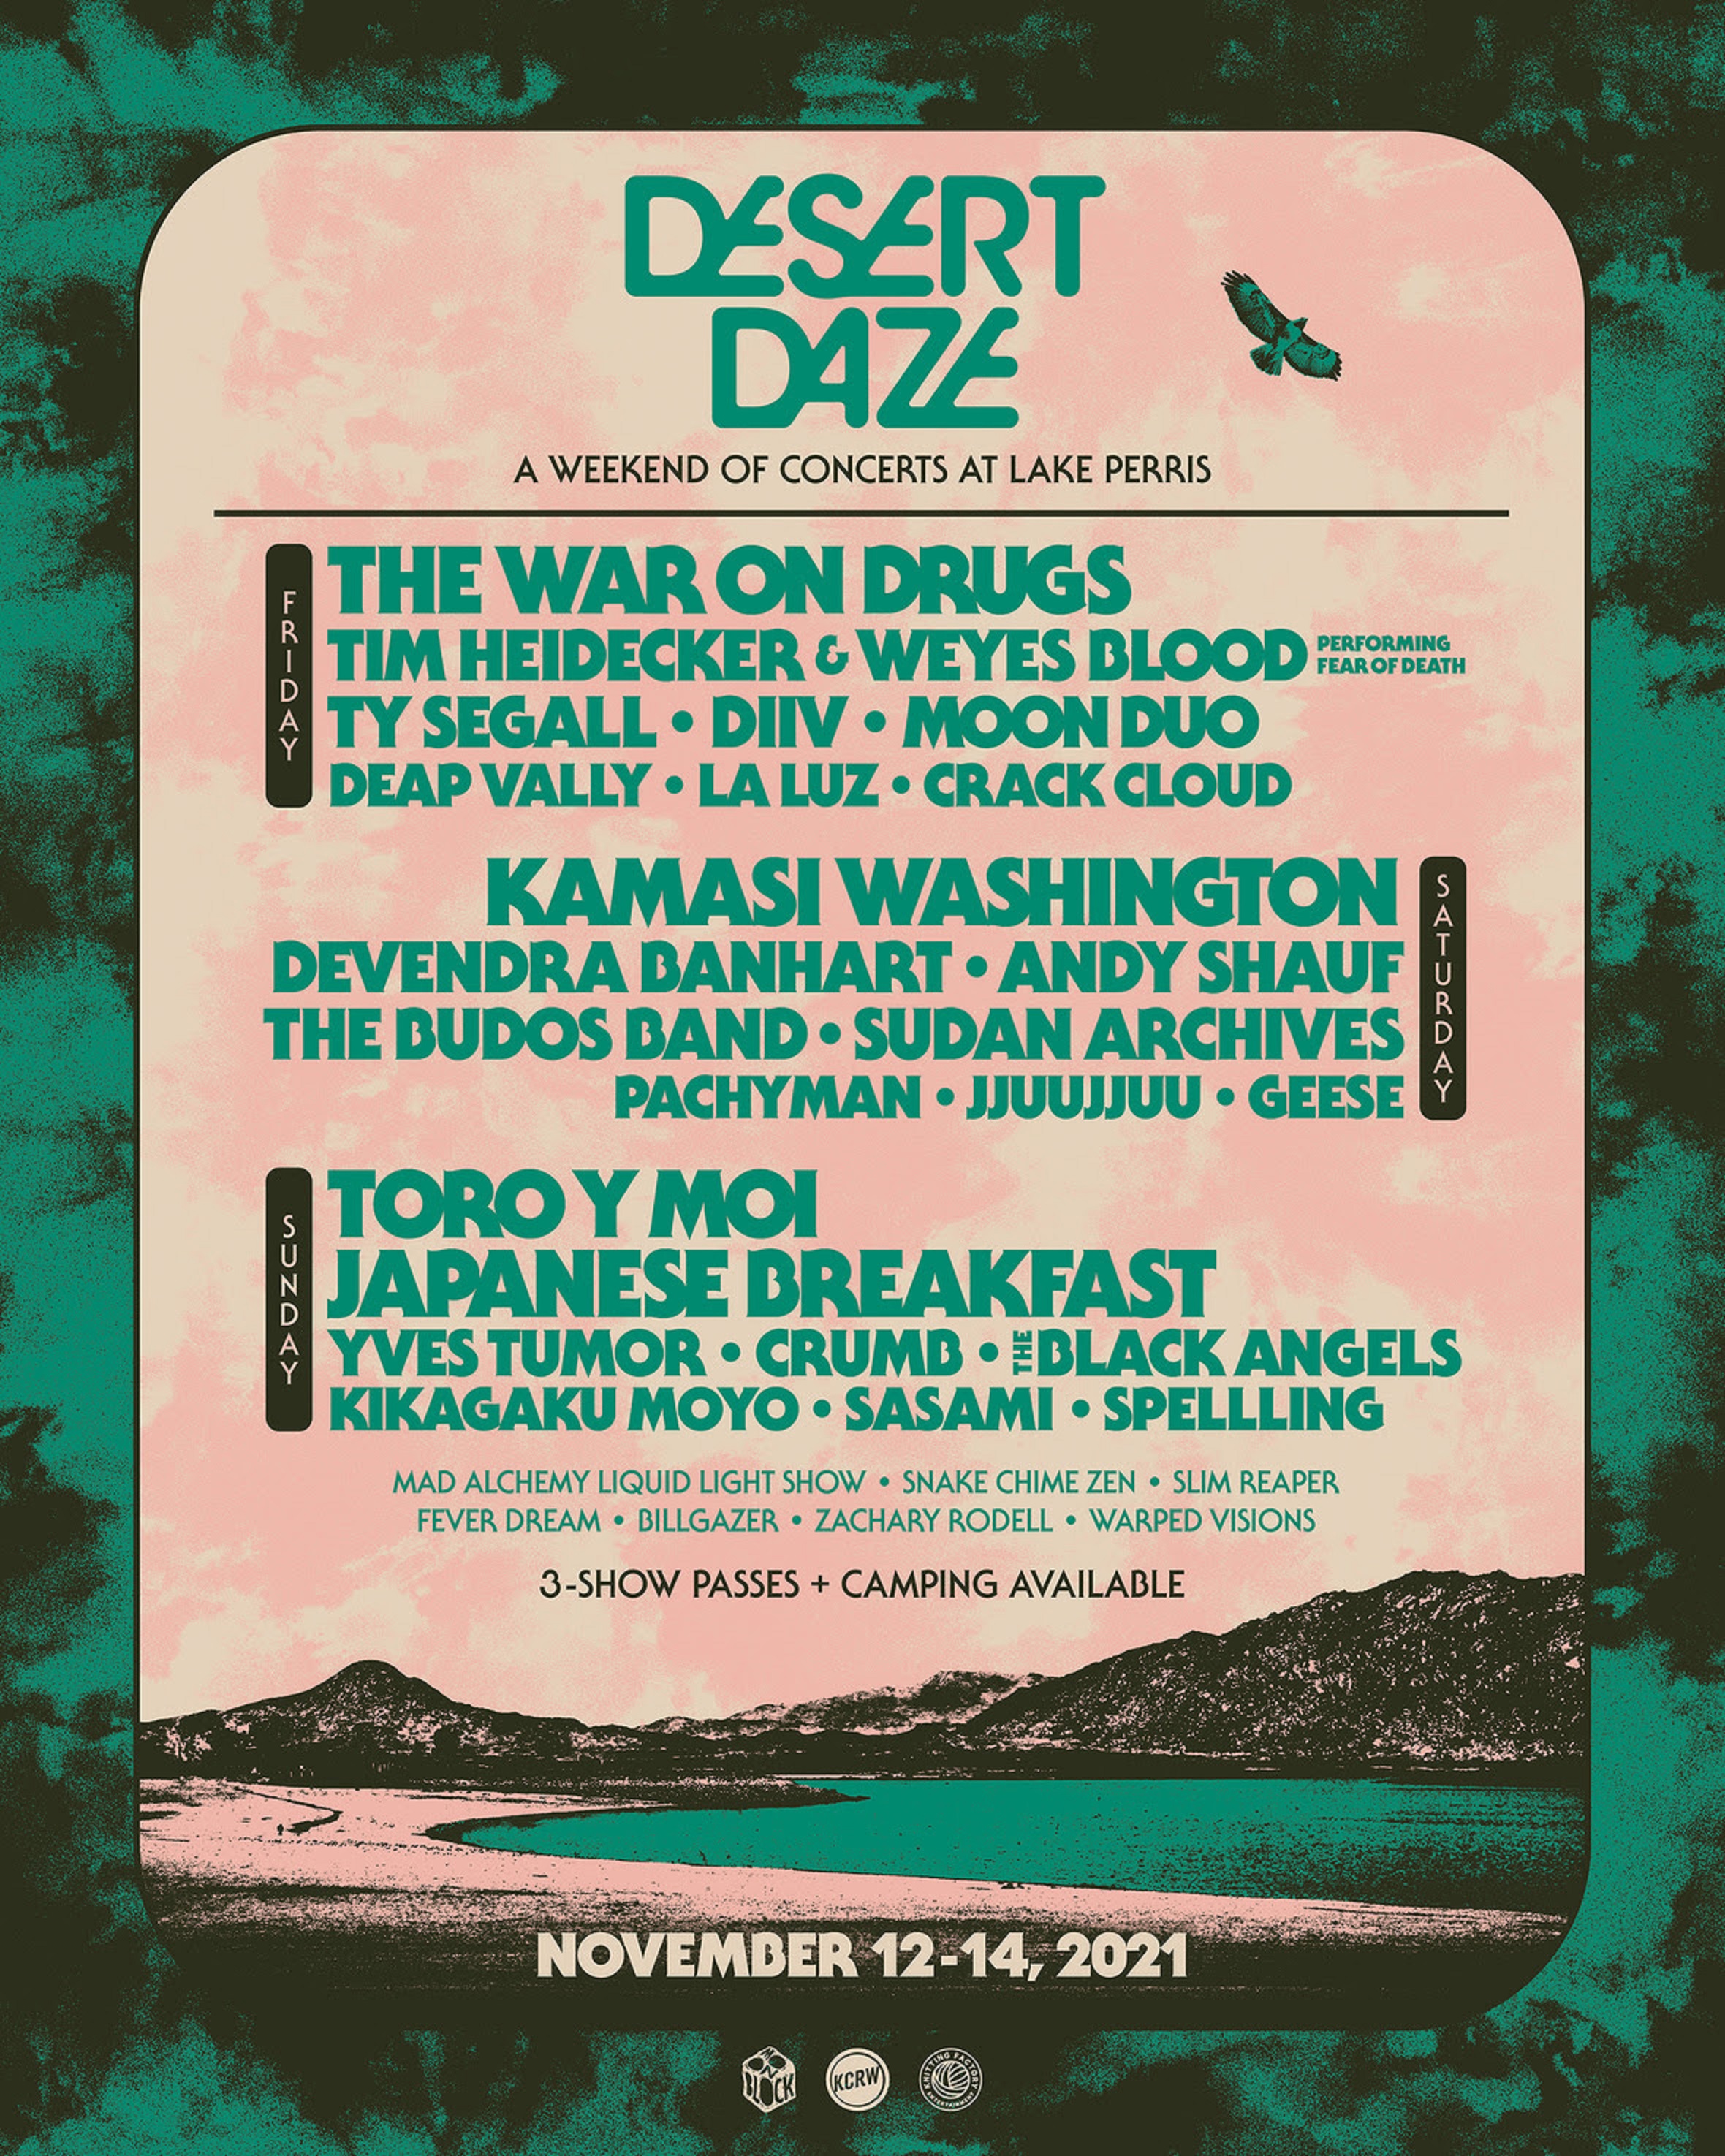 DESERT DAZE 2021 - A WEEKEND OF CONCERTS AT LAKE PERRIS